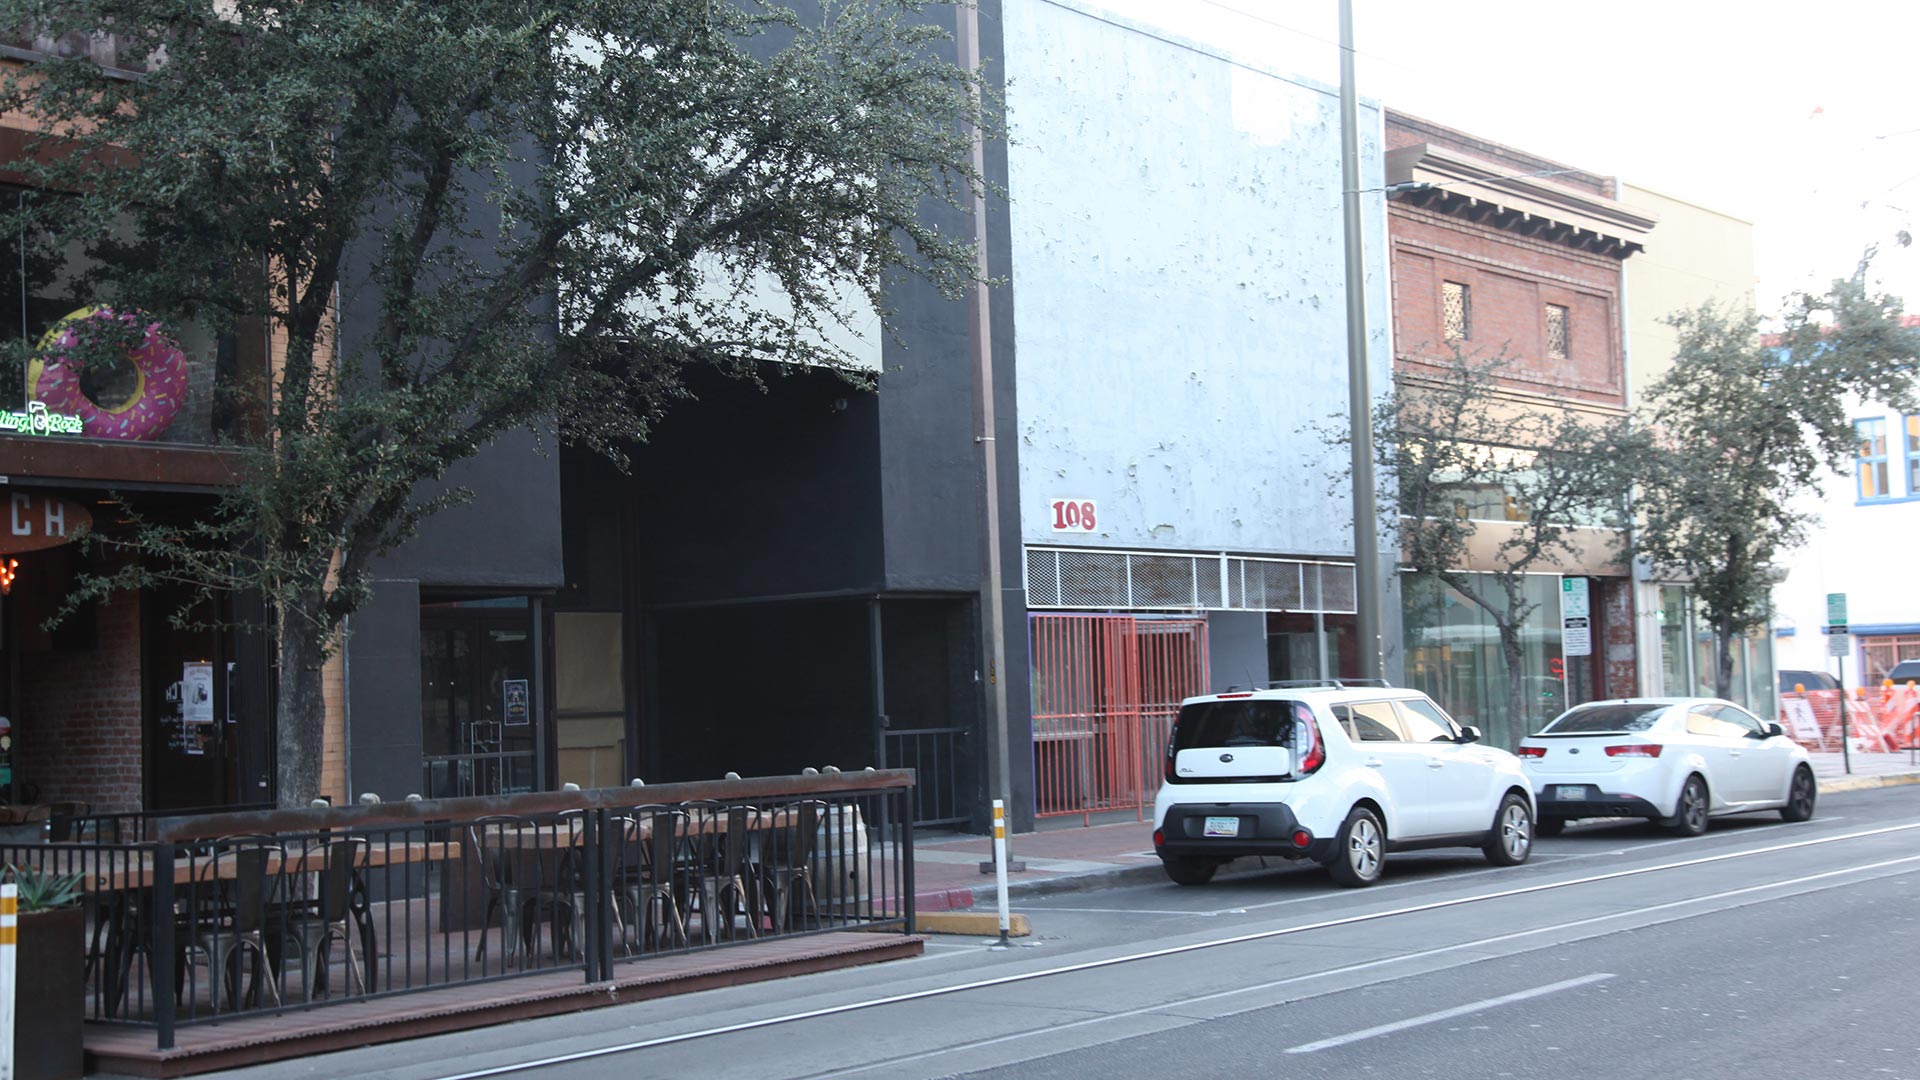 The two buildings at 110 and 108 East Congress are being turned into a space for Ten Fifty-Five Brewing Company's downtown taproom and craft sausage restaurant.